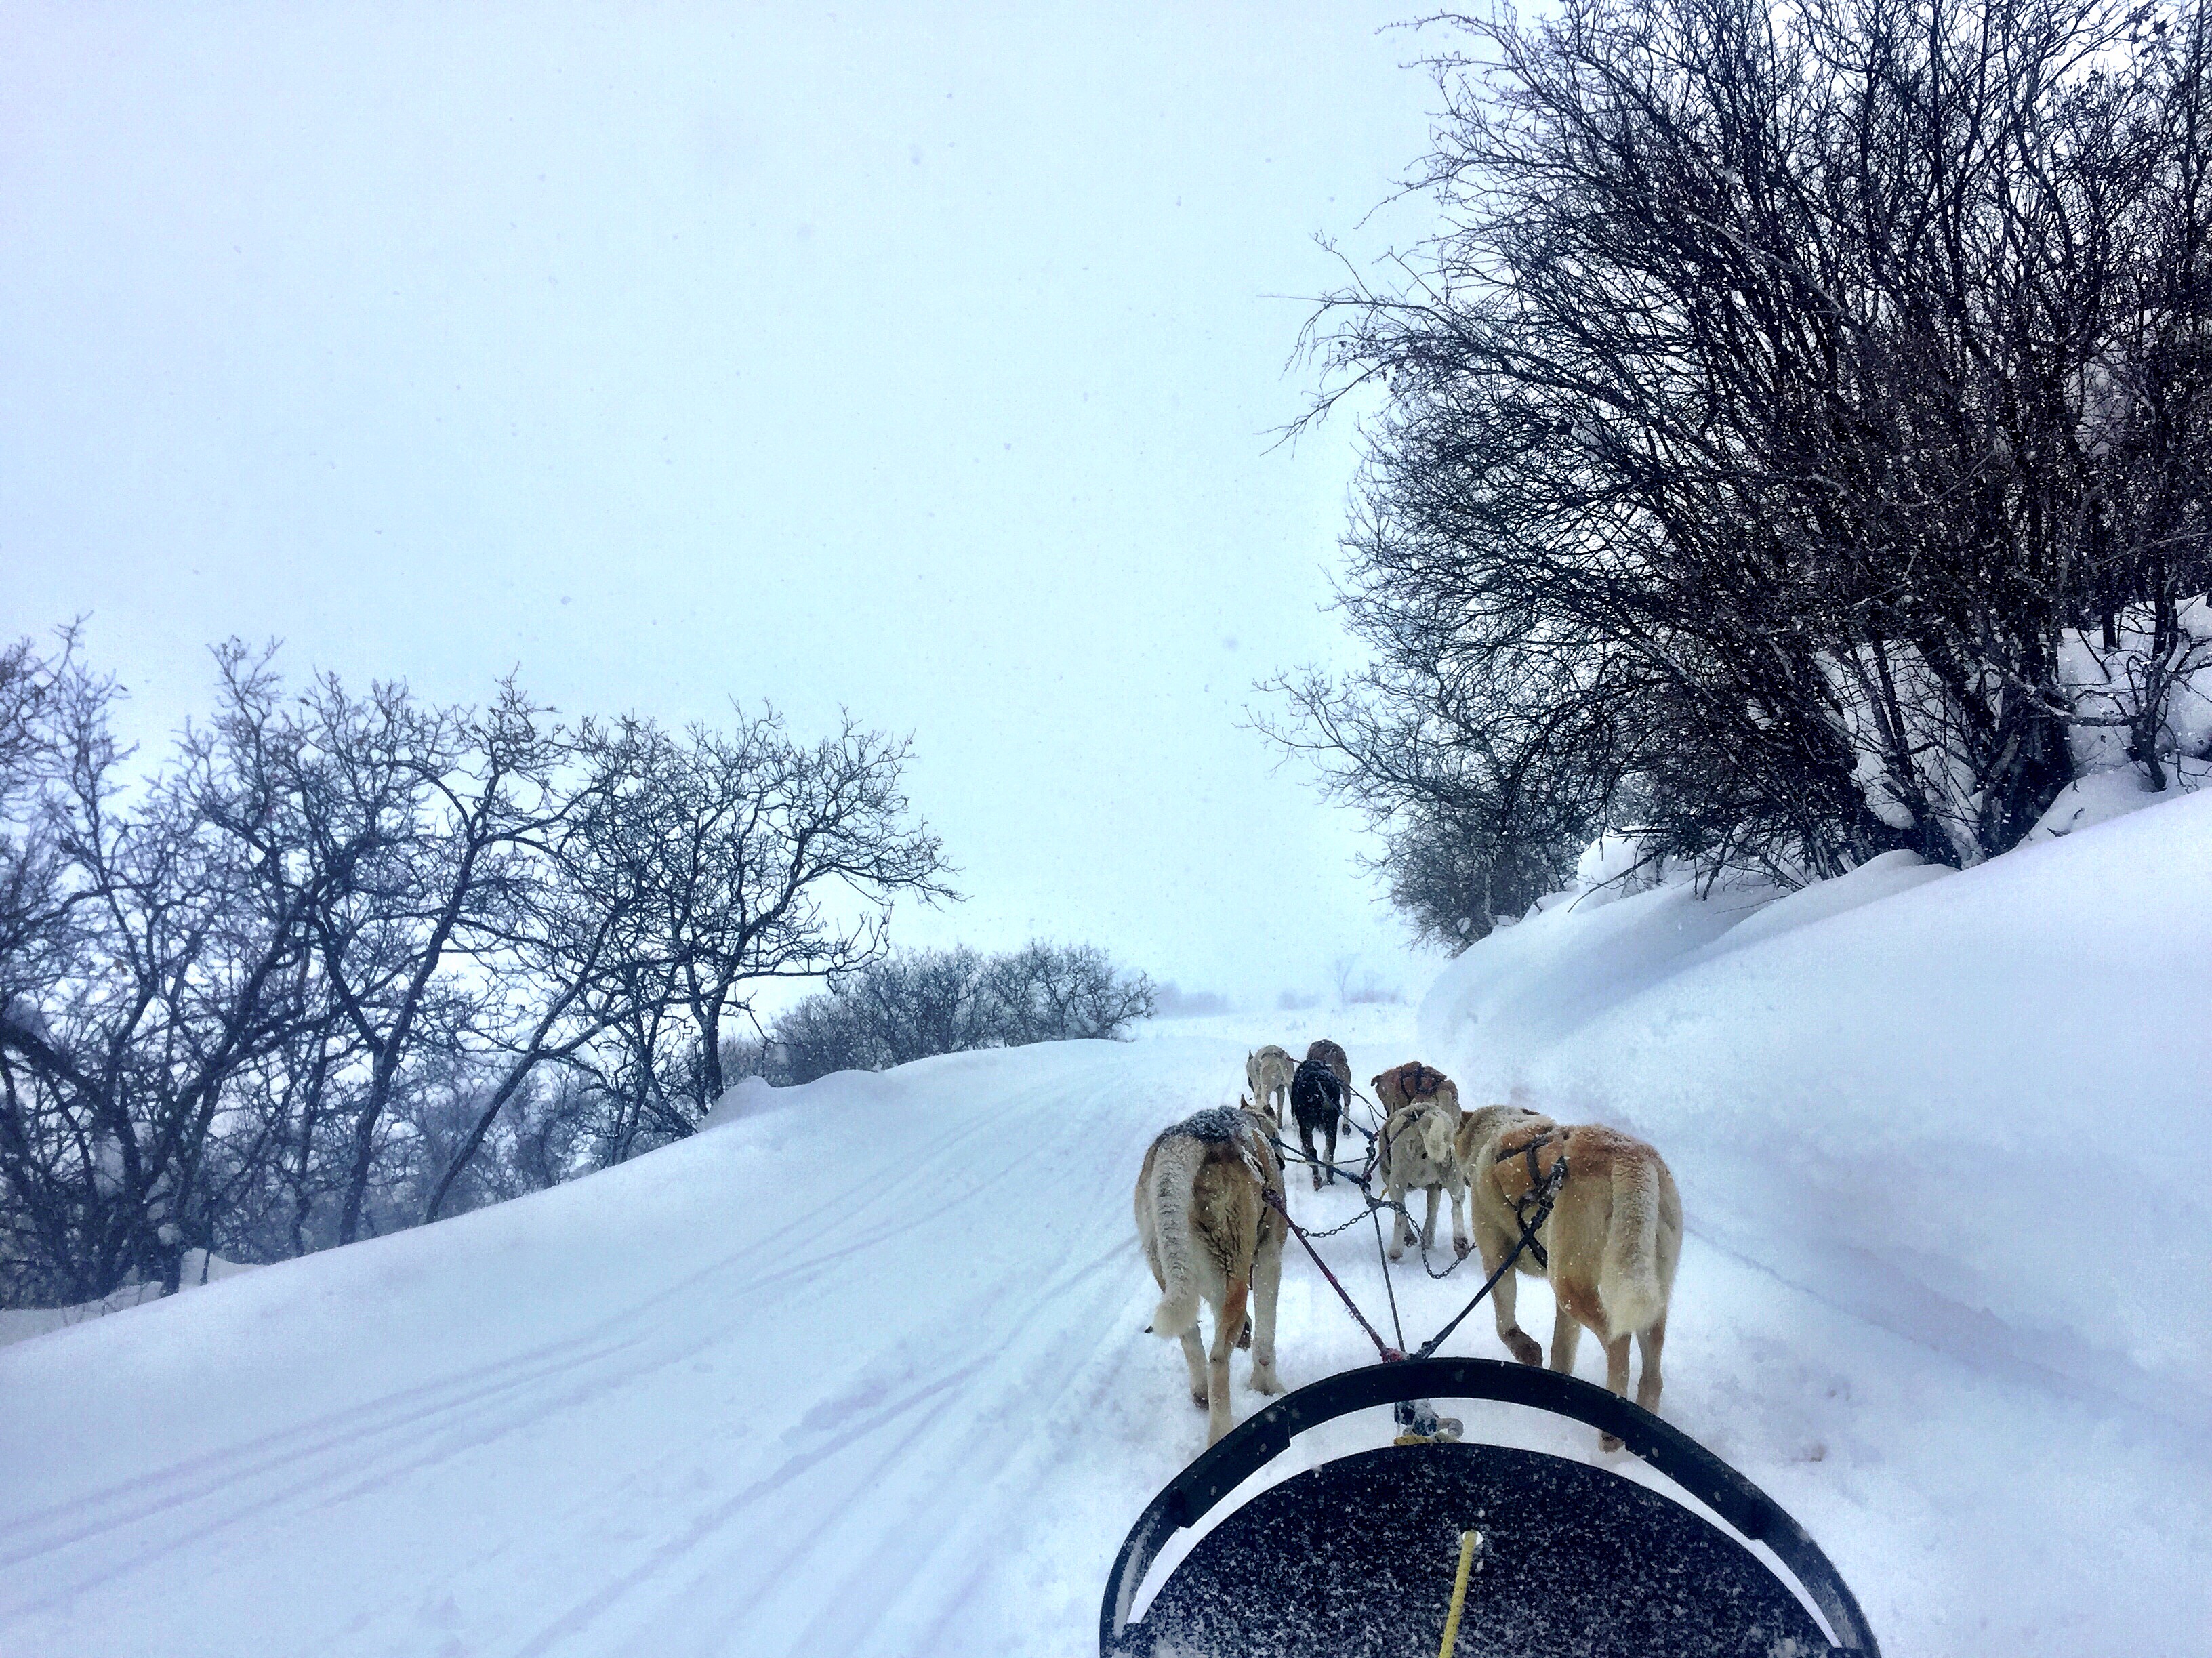 From dog sledding to snowmobiling, there's lots more to do in Steamboat Springs, Colorado than ski.